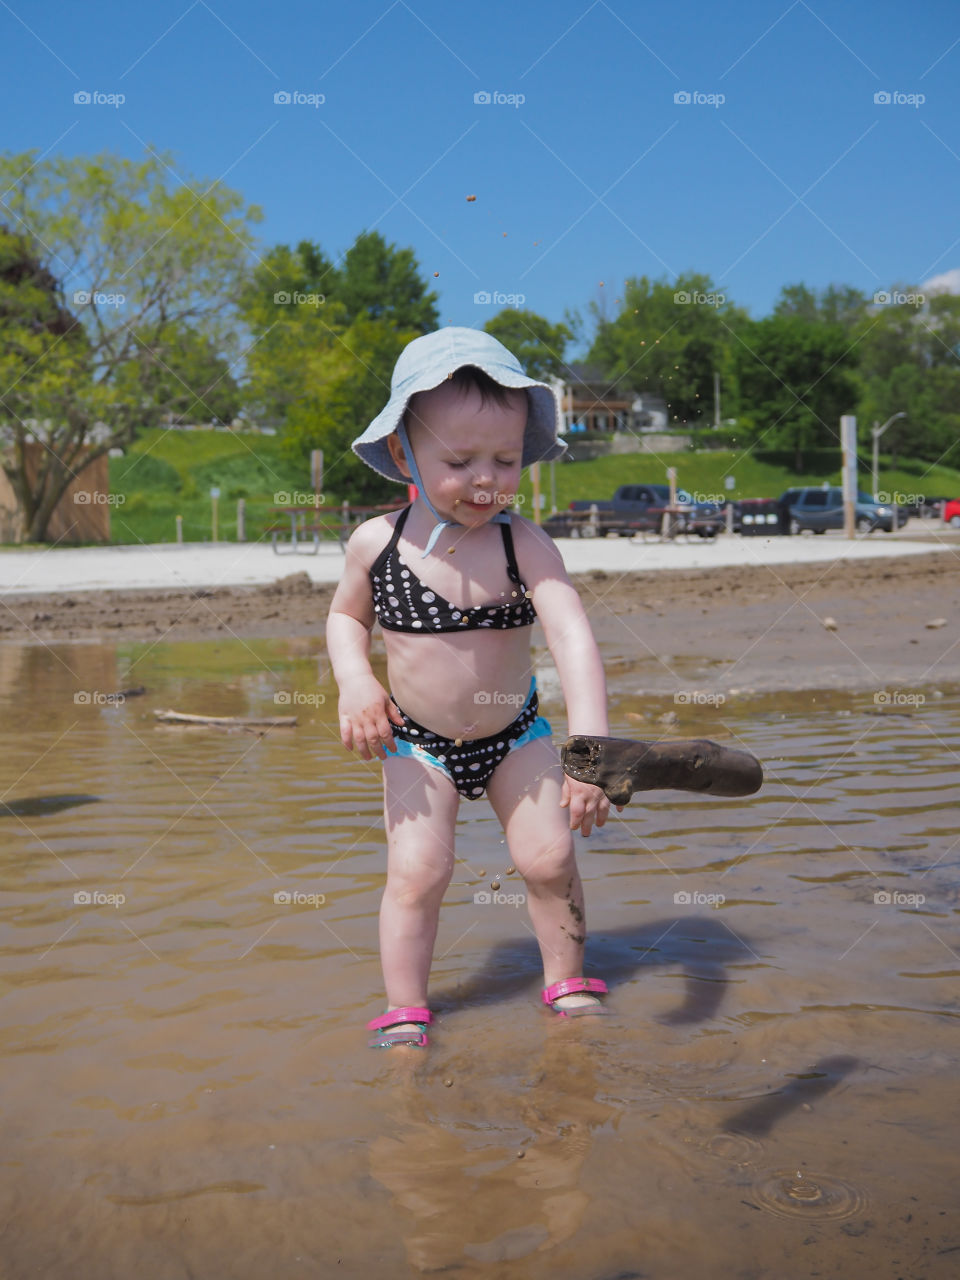 Toddler girl throwing a stick into the water.